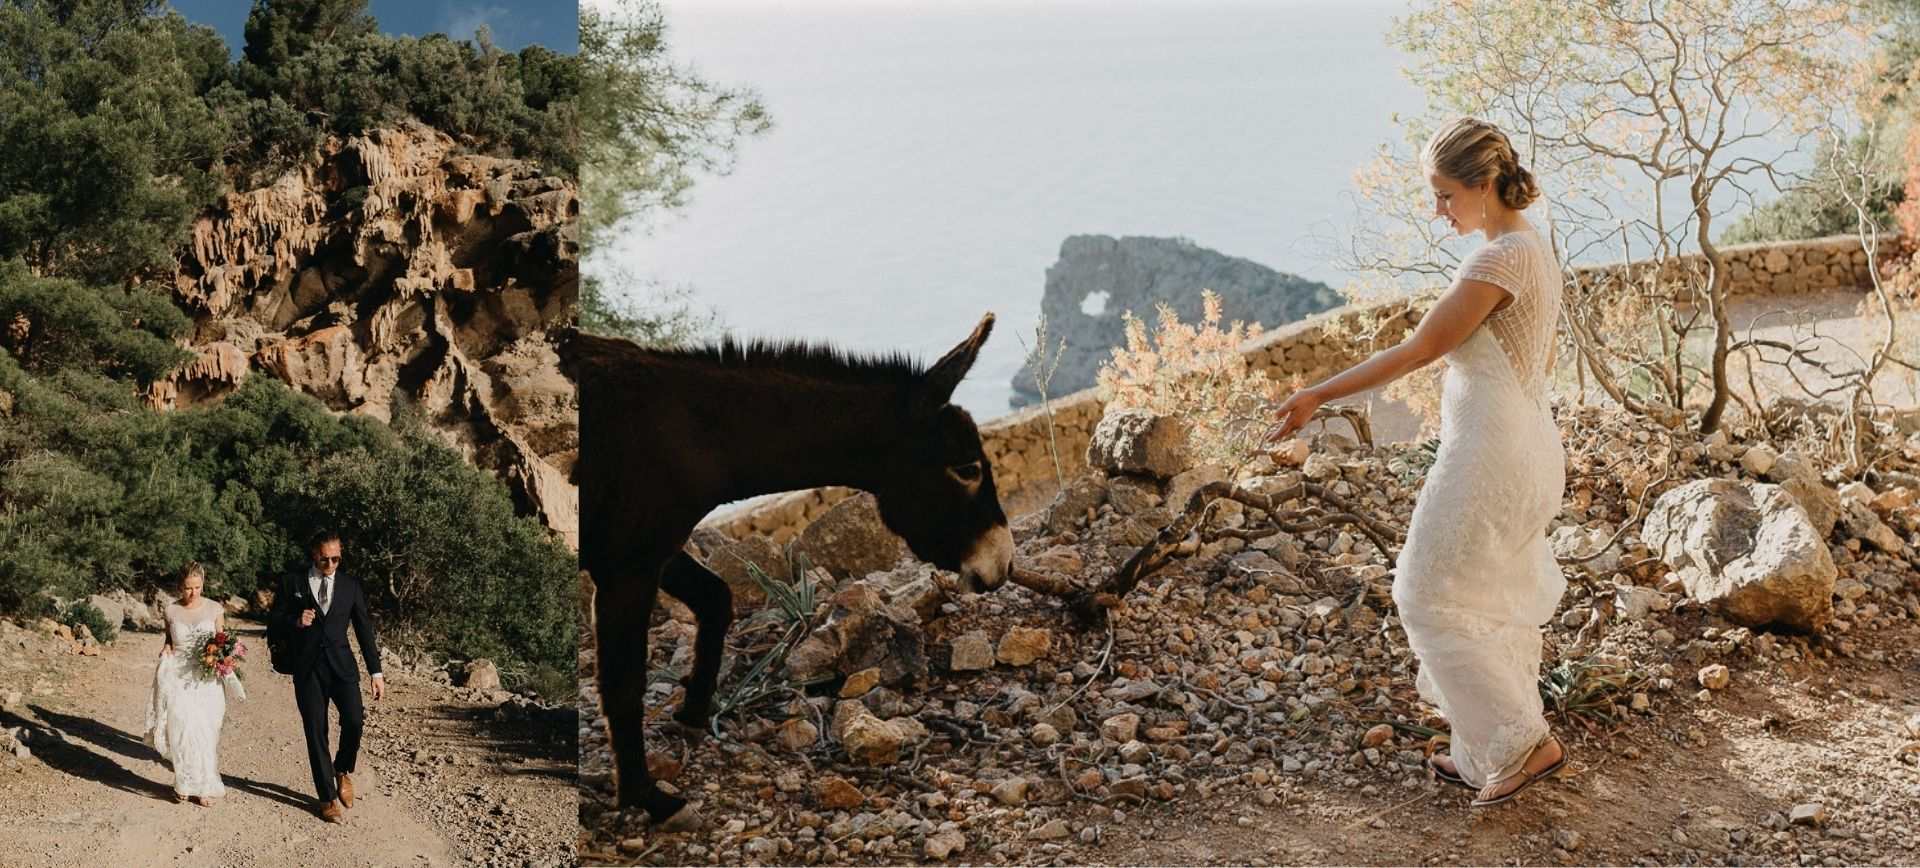 mallorca elopement planner - adventure wedding in Mallorca - bride with donkey during hiking wedding